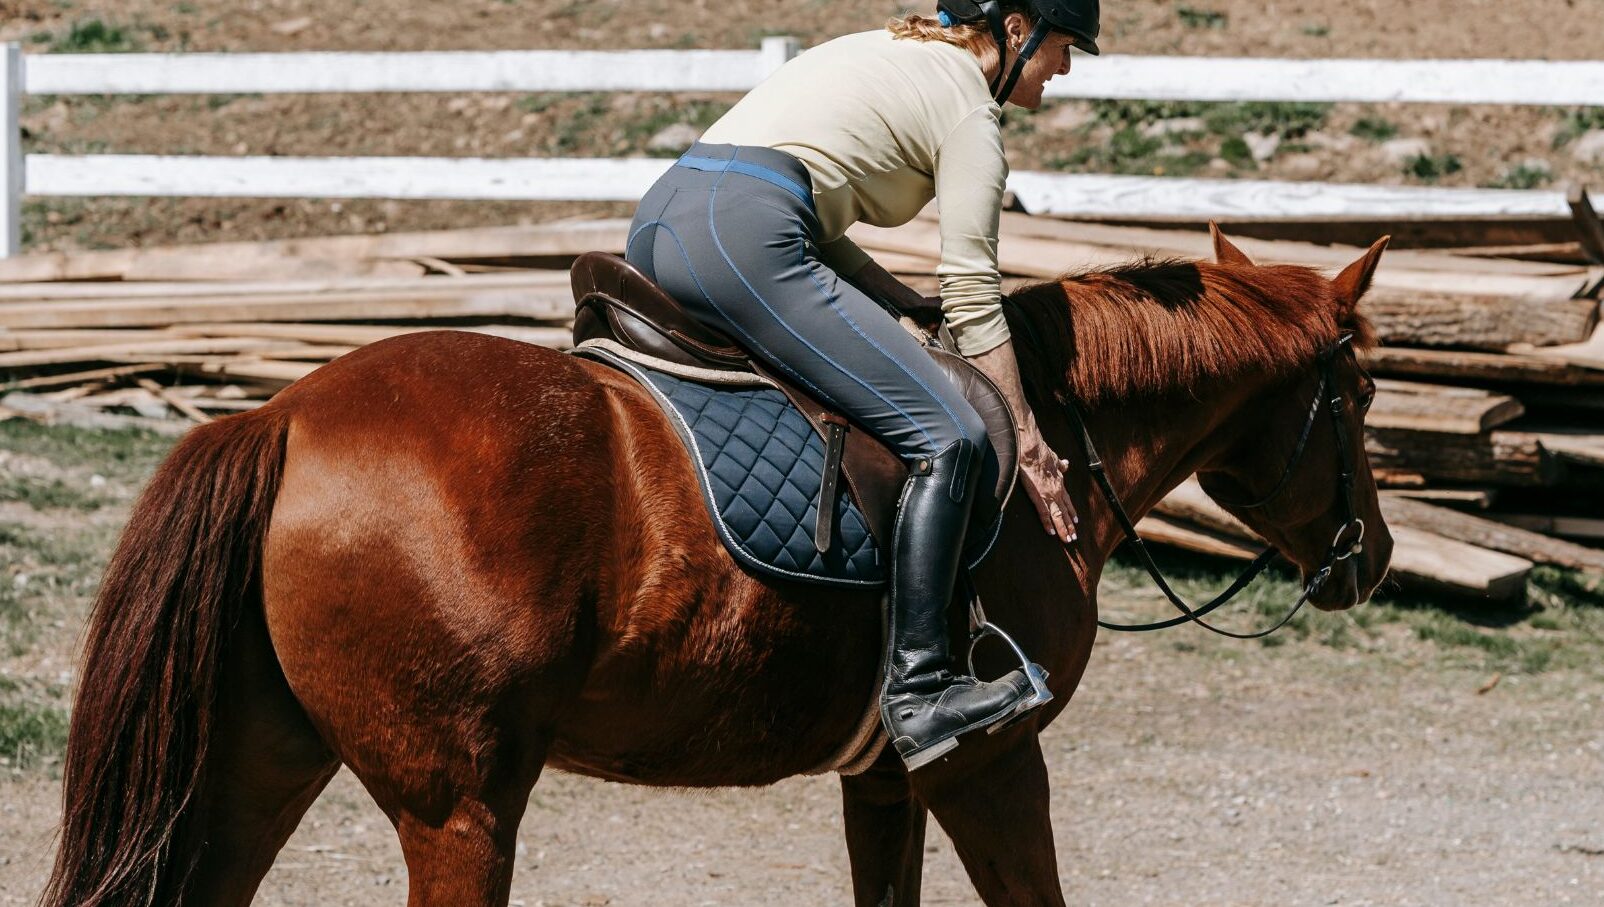 10 Best Horse Riding Pants (English + Western Styles) - Horse Rookie